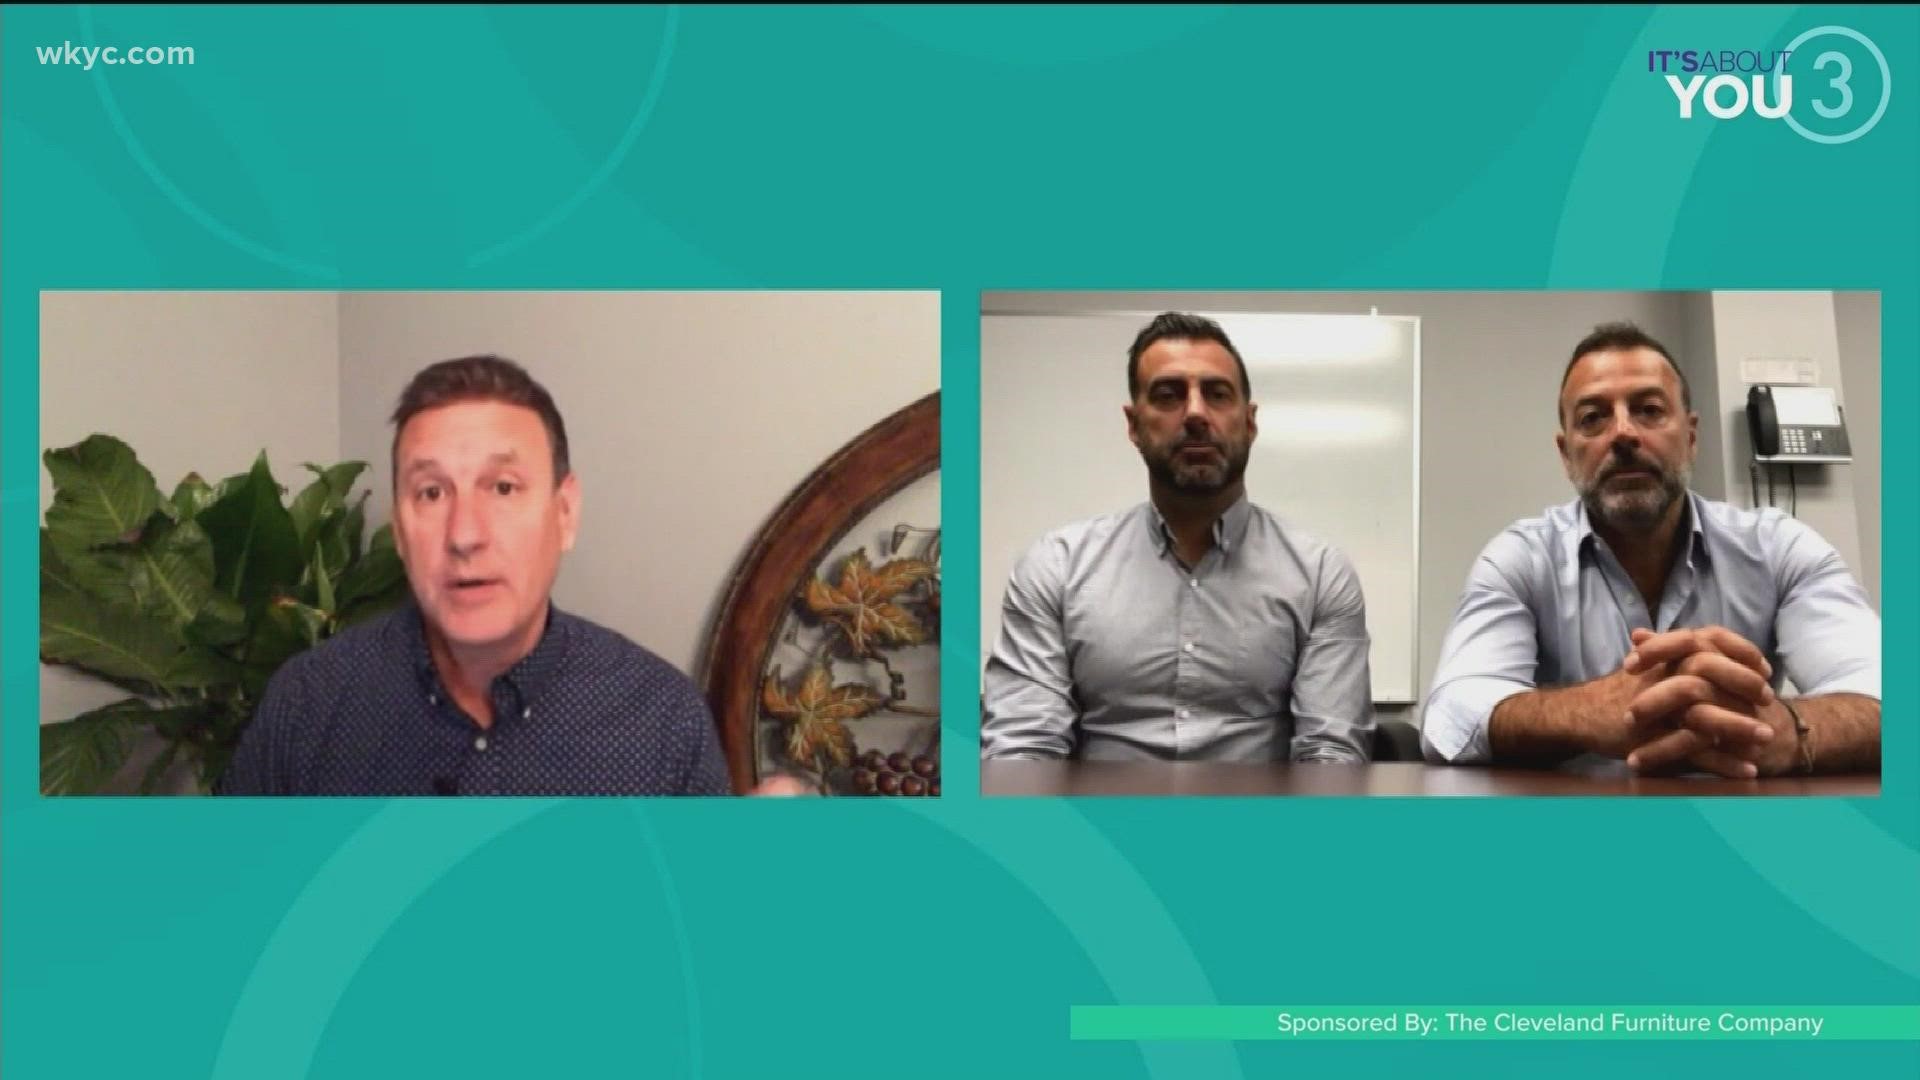 Joe is talking with Jason Cirino & Paul Cirino, from Cleveland Furniture Company, about their incredible inventory of furniture that will look great in your home!